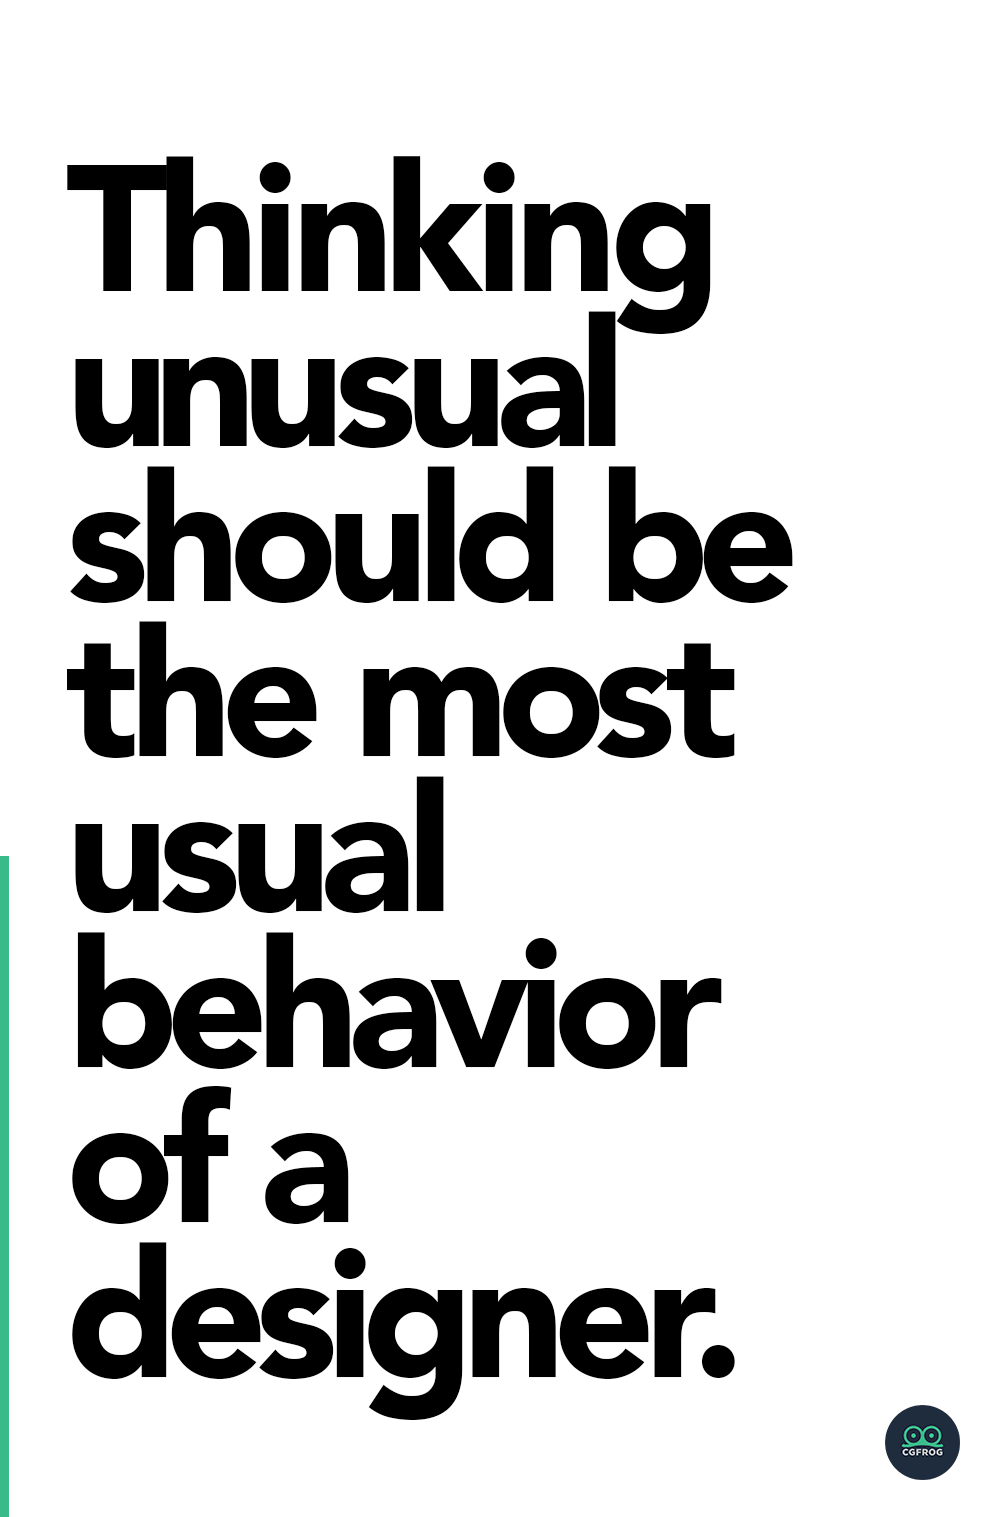 Thinking unusual should be the most usual behavior of a designer